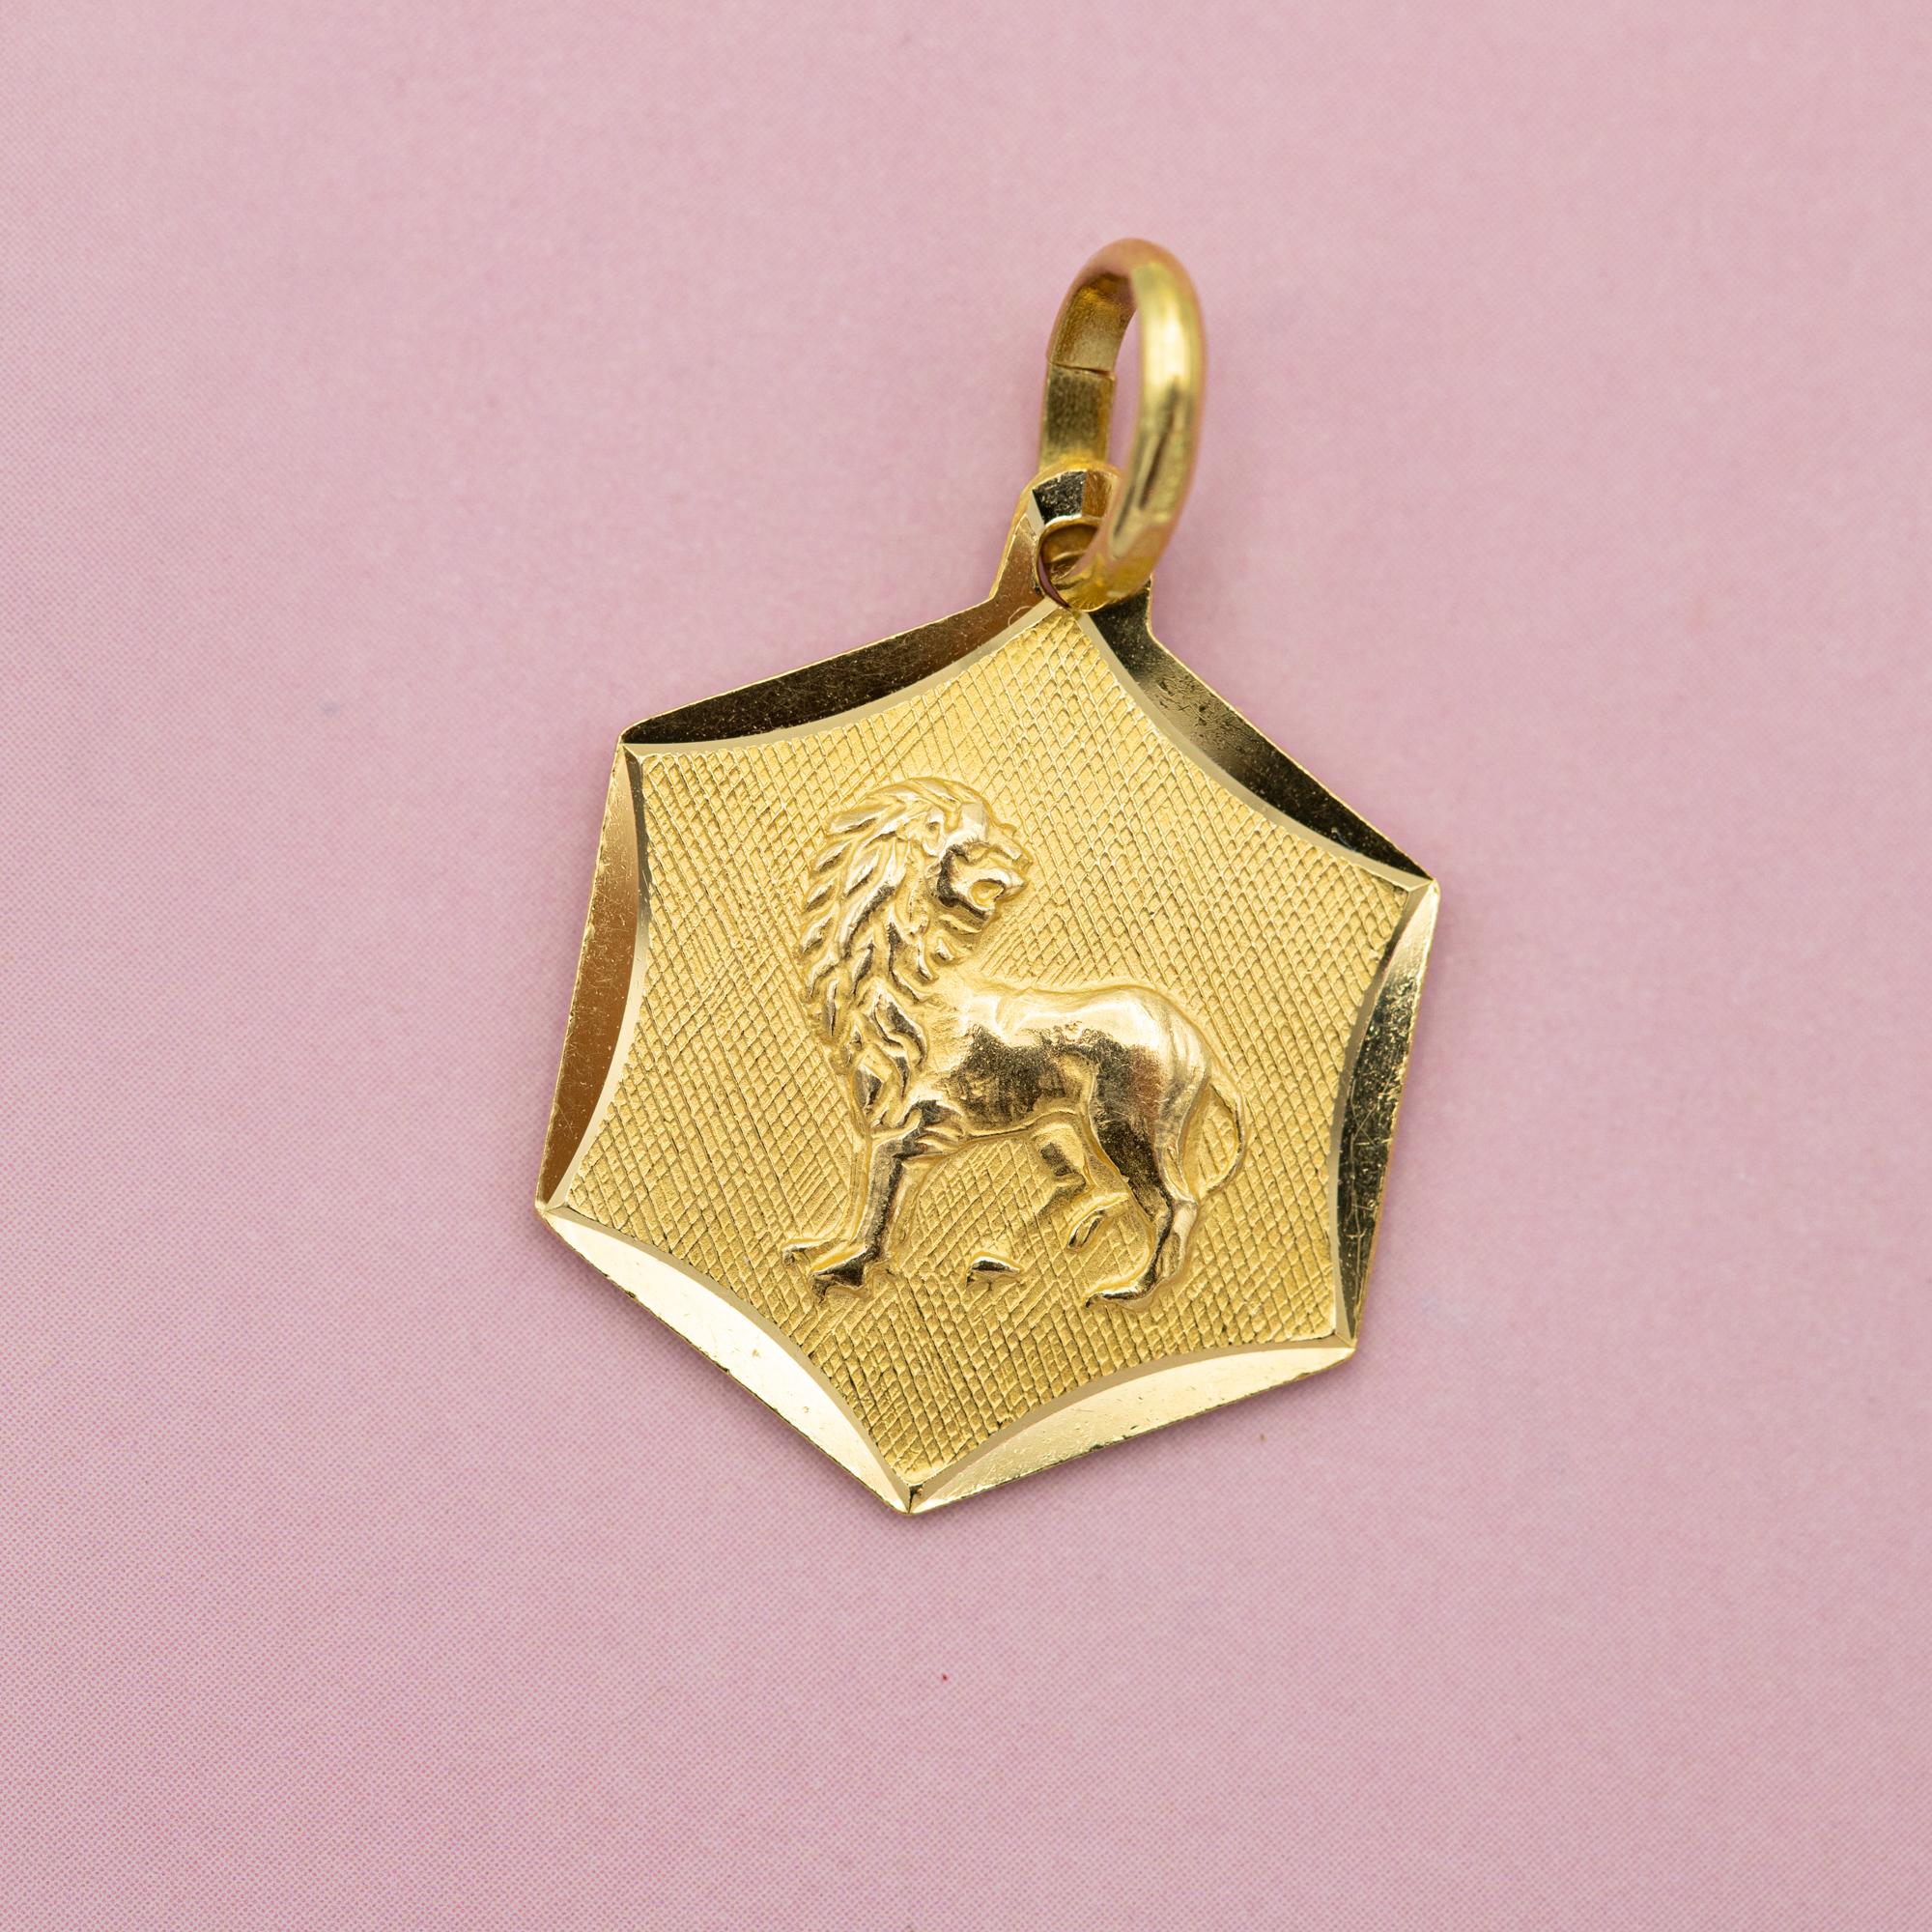 For sale is this vintage charm depicting a Leo, the fifth astrological sign in the zodiac. This Constellation Star Sign Pendant is associated with the birth dates between 22 July and 21 August. This pretty charm is marked with a 750 mark, an Italian